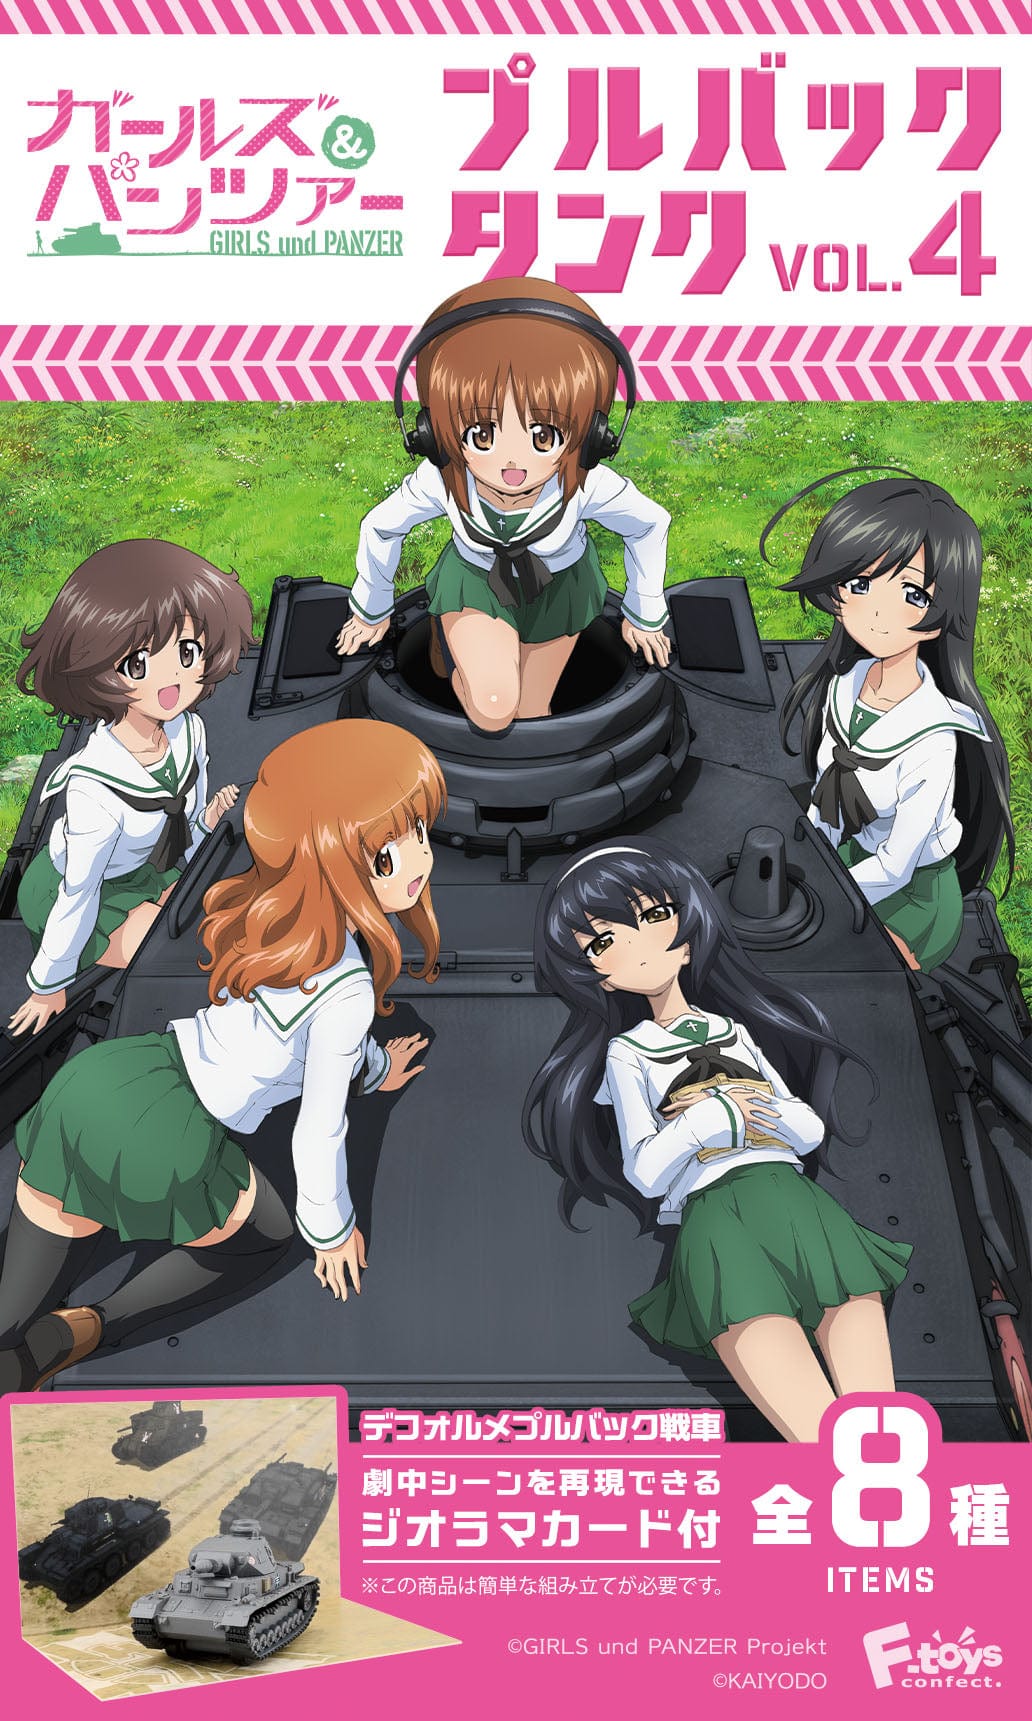 F-toys confect GIRLS and PANZER pull buck tunk 4